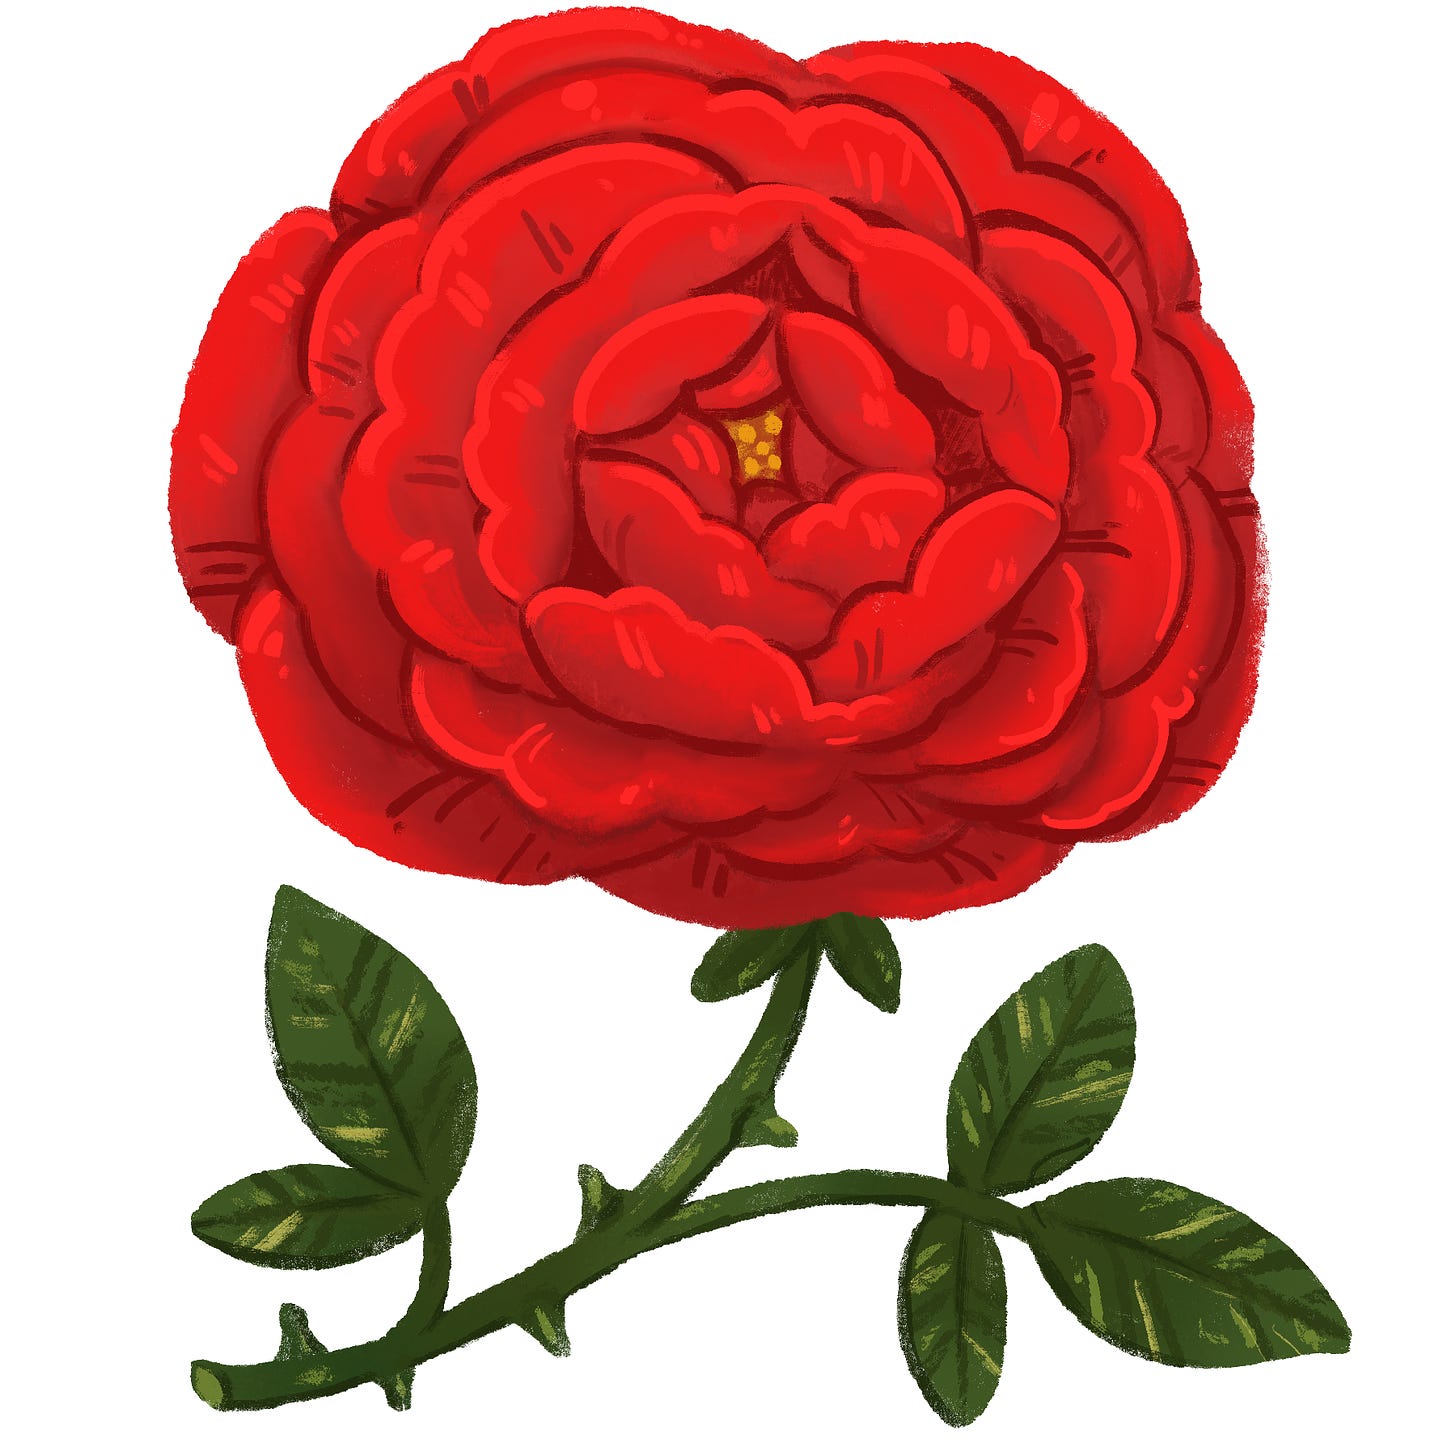 An illustration of a stylized rose